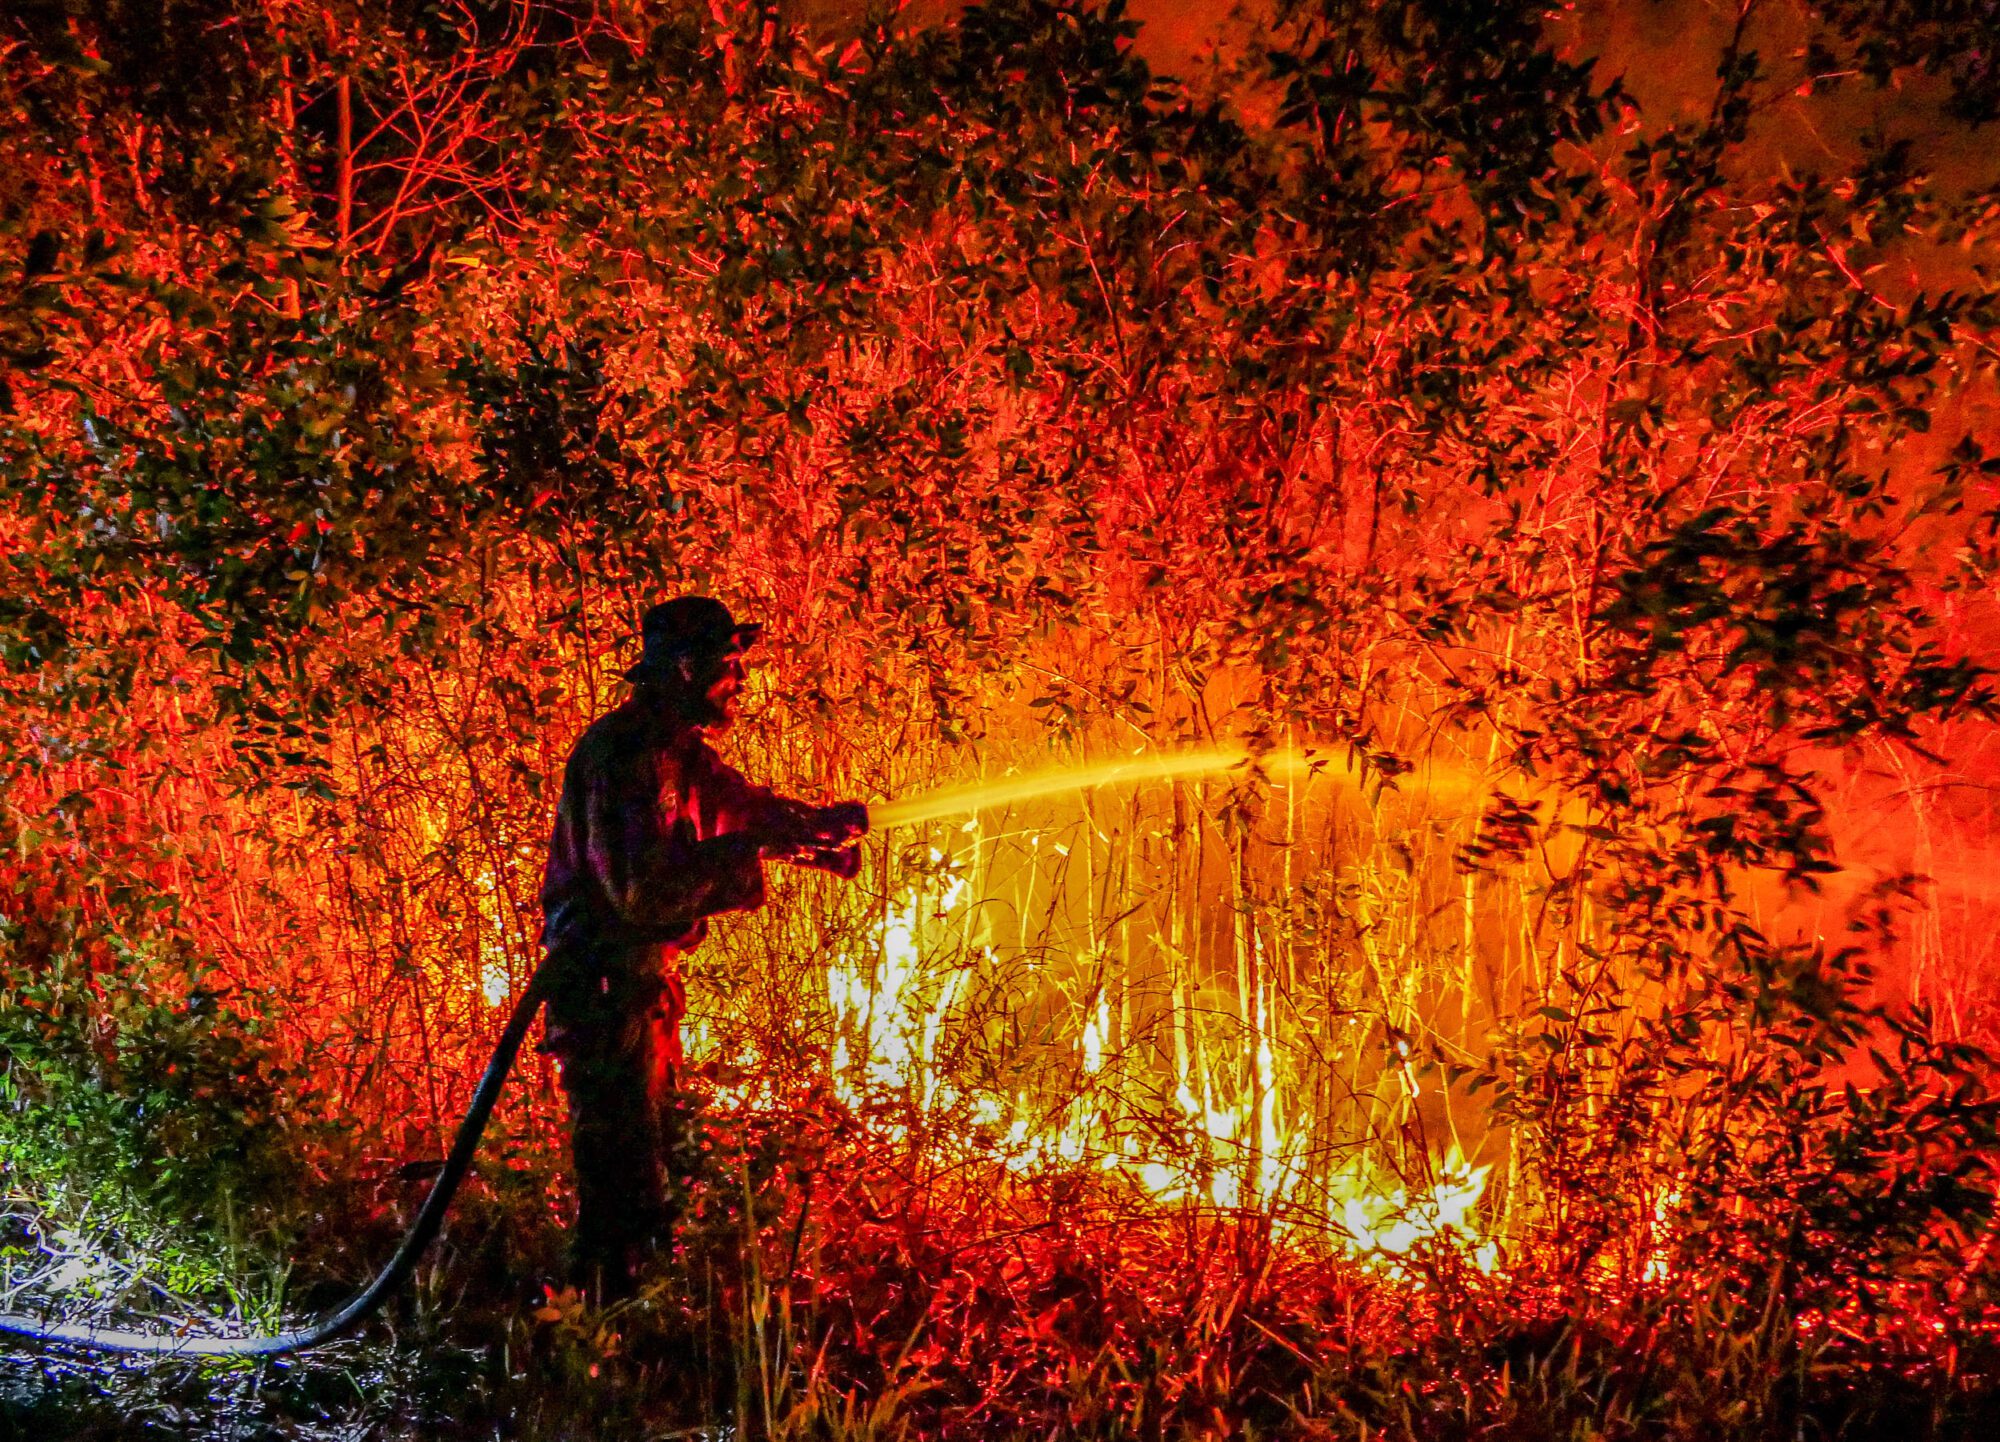 An entirely deep orange forest scene with a person in firefighting gear holding a hose, the water from which is pouring out in a straight line and is as bright orange as the fire burning underneath it.